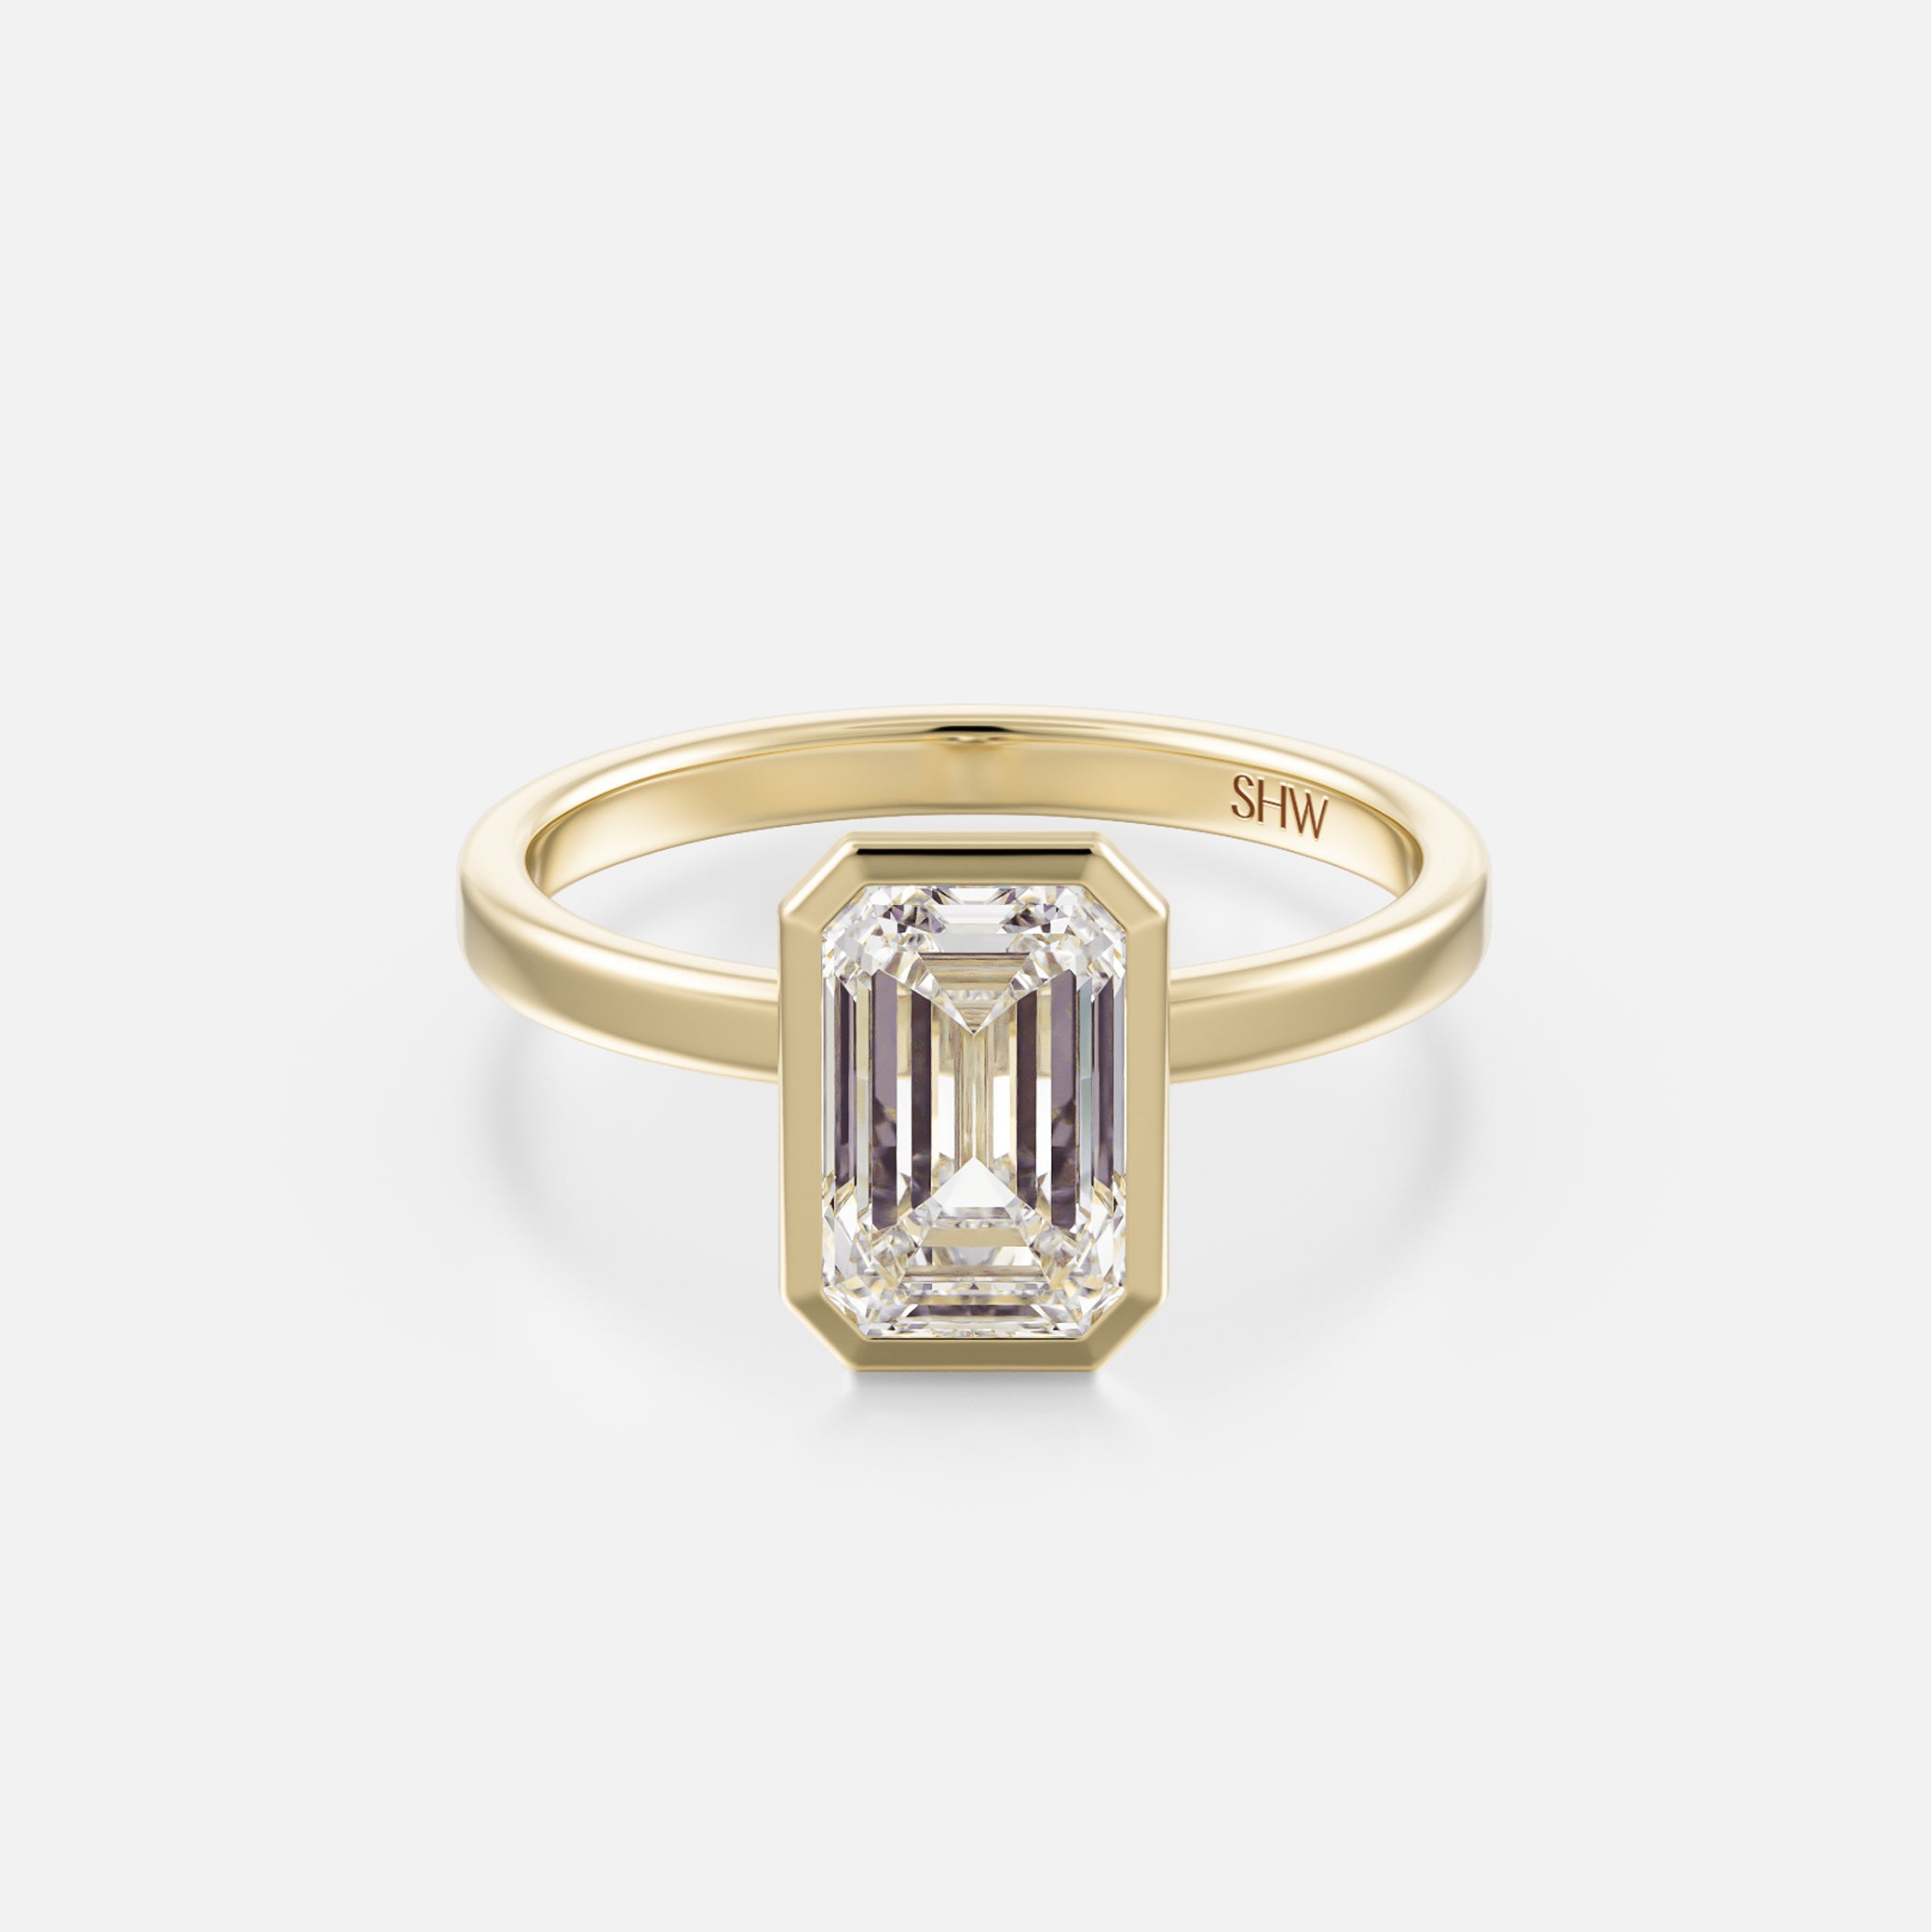 Mana Square Profile with North South Emerald Minimalist Engagement Ring Setting handcrafted by SHW Fine Jewelry New York City